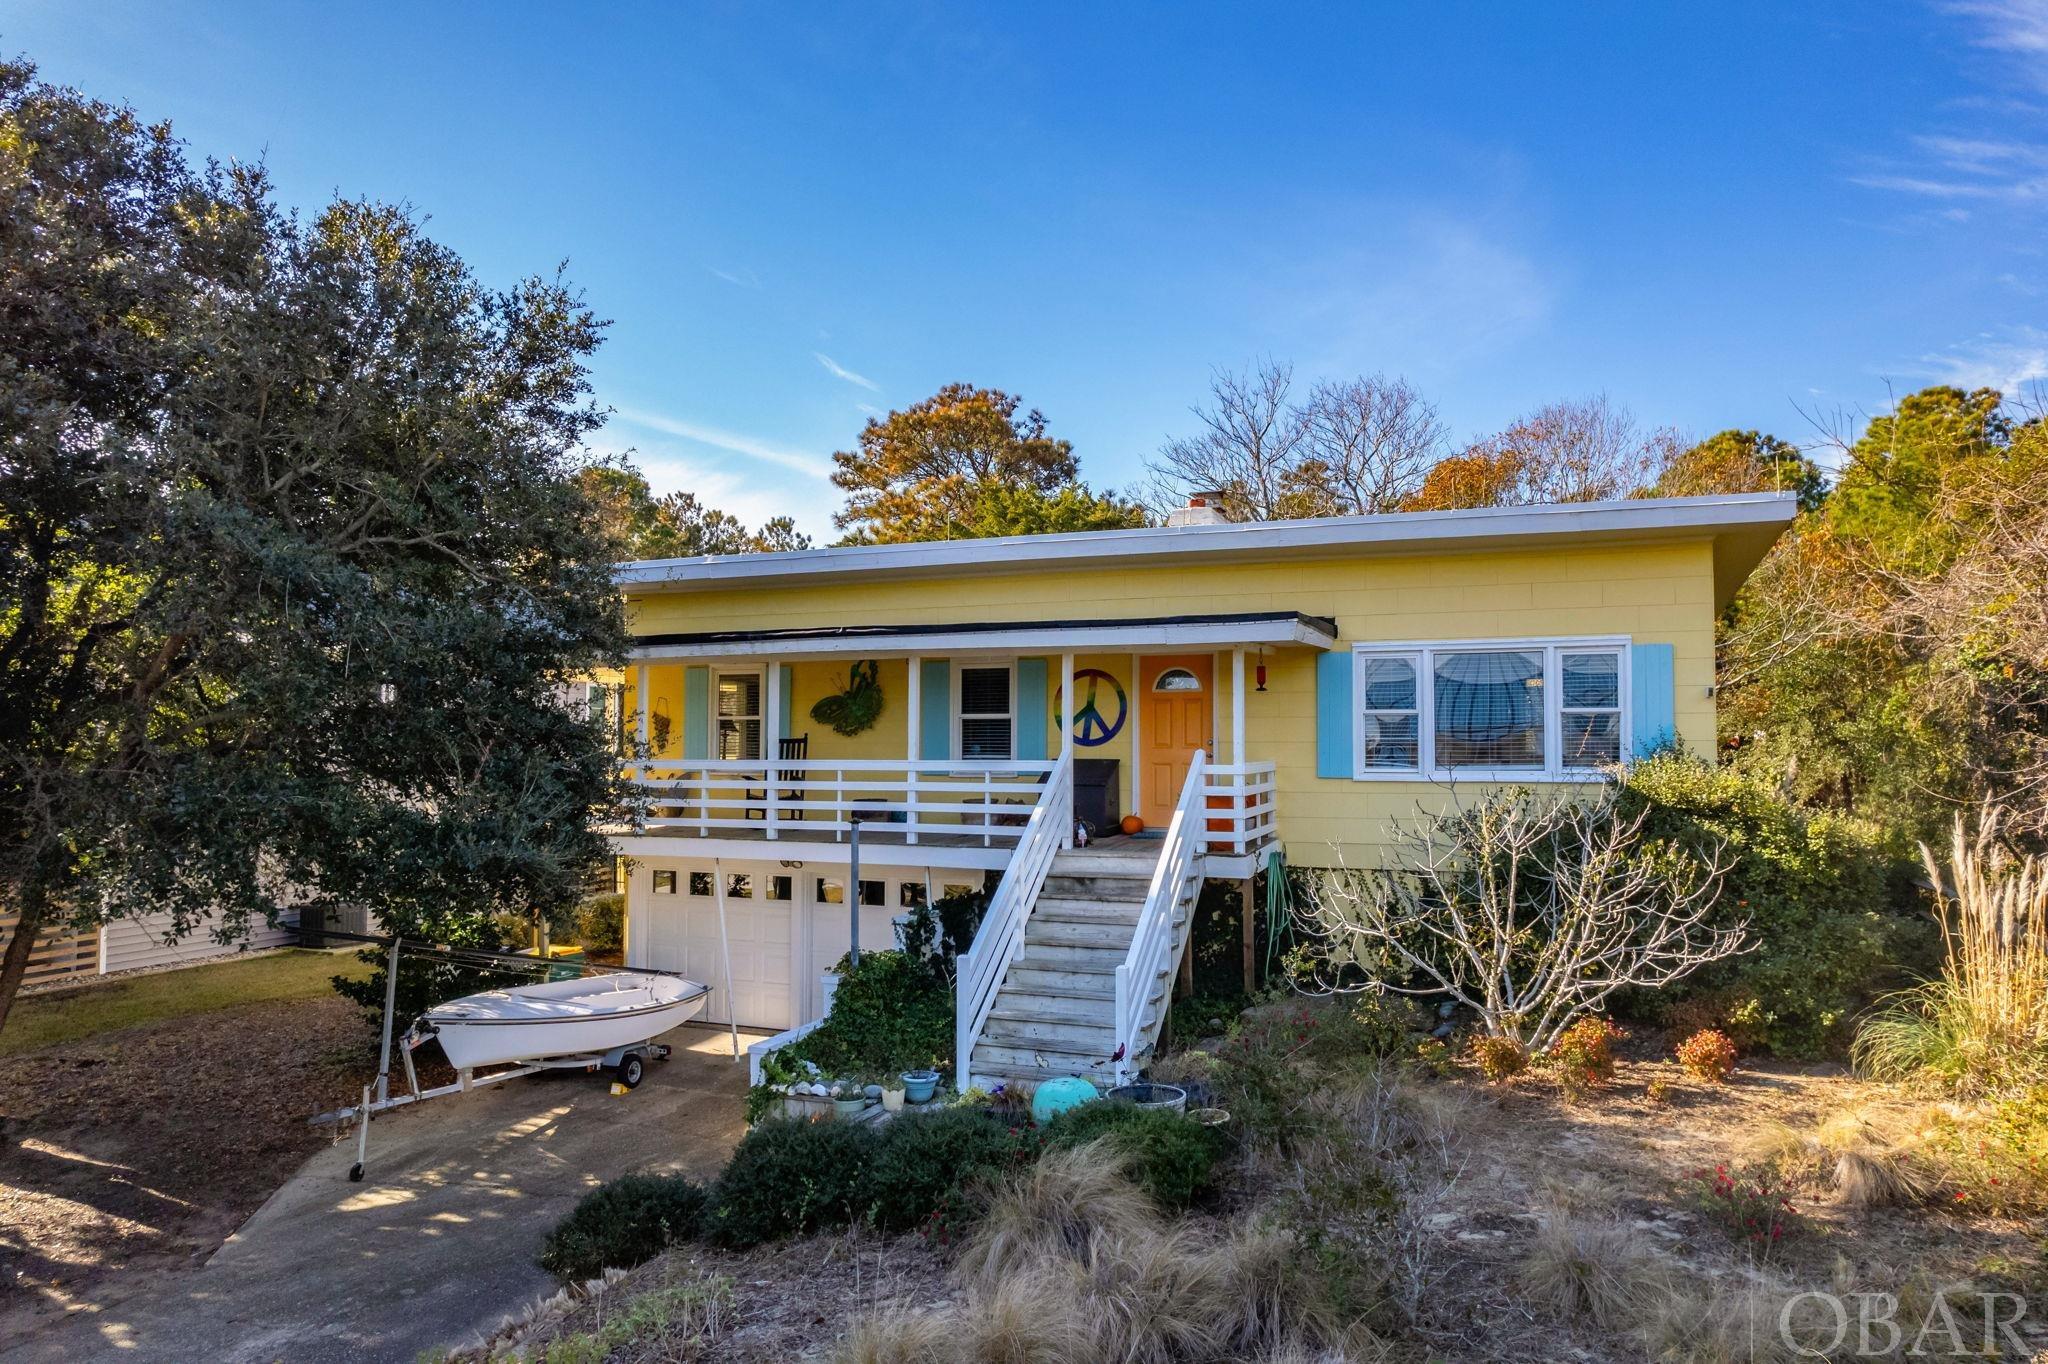 Don’t miss the rare opportunity to own a vintage Southern Shores flat top in a perfect location close to the beach! This beauty from 1960 is airy and light with a fantastic 3/2 floor plan plus incredible basement storage (including a half bath) and a double garage. Don’t worry—its not a tear down! It is a great primary home, second home or vacation rental property.  Inside the home the large windows and skylights bathe the living room area in natural light. The wood paneled walls are epic. The kitchen is designed and outfitted by a chef. There are cool nooks and crannies offering storage and style. The tiled baths are updated with modern touches and timeless materials. The 5 panel cedar doors throughout are gorgeous. The wood burning fireplace is solid and substantial.     The location could not be more ideal.  It is perched at the top of the dune with great elevation. Stroll just 500 yards to the beach directly down Skyline, or you can also take the Ocean View Loop trail to get to a roll over access. The home backs to Chickahauk common space for added privacy. It is steps away from the path connecting to an incredible network of sidewalks and shaded walking paths.  Skyline is a hidden gem in Southern Shores with 6 historic flat tops, no cut through, smaller lot sizes with smaller homes, all within easy walking distance to great restaurants and shopping.  Its super convenient to everything—the beach, airport, “town”, Duck.  Walk, bike or e-bike everywhere you need to go.  Skyline was the first street developed in Southern Shores and today has a nice mix of primary and second homes with the occasional rental.    If you want a home with style and soul, this is your chance!